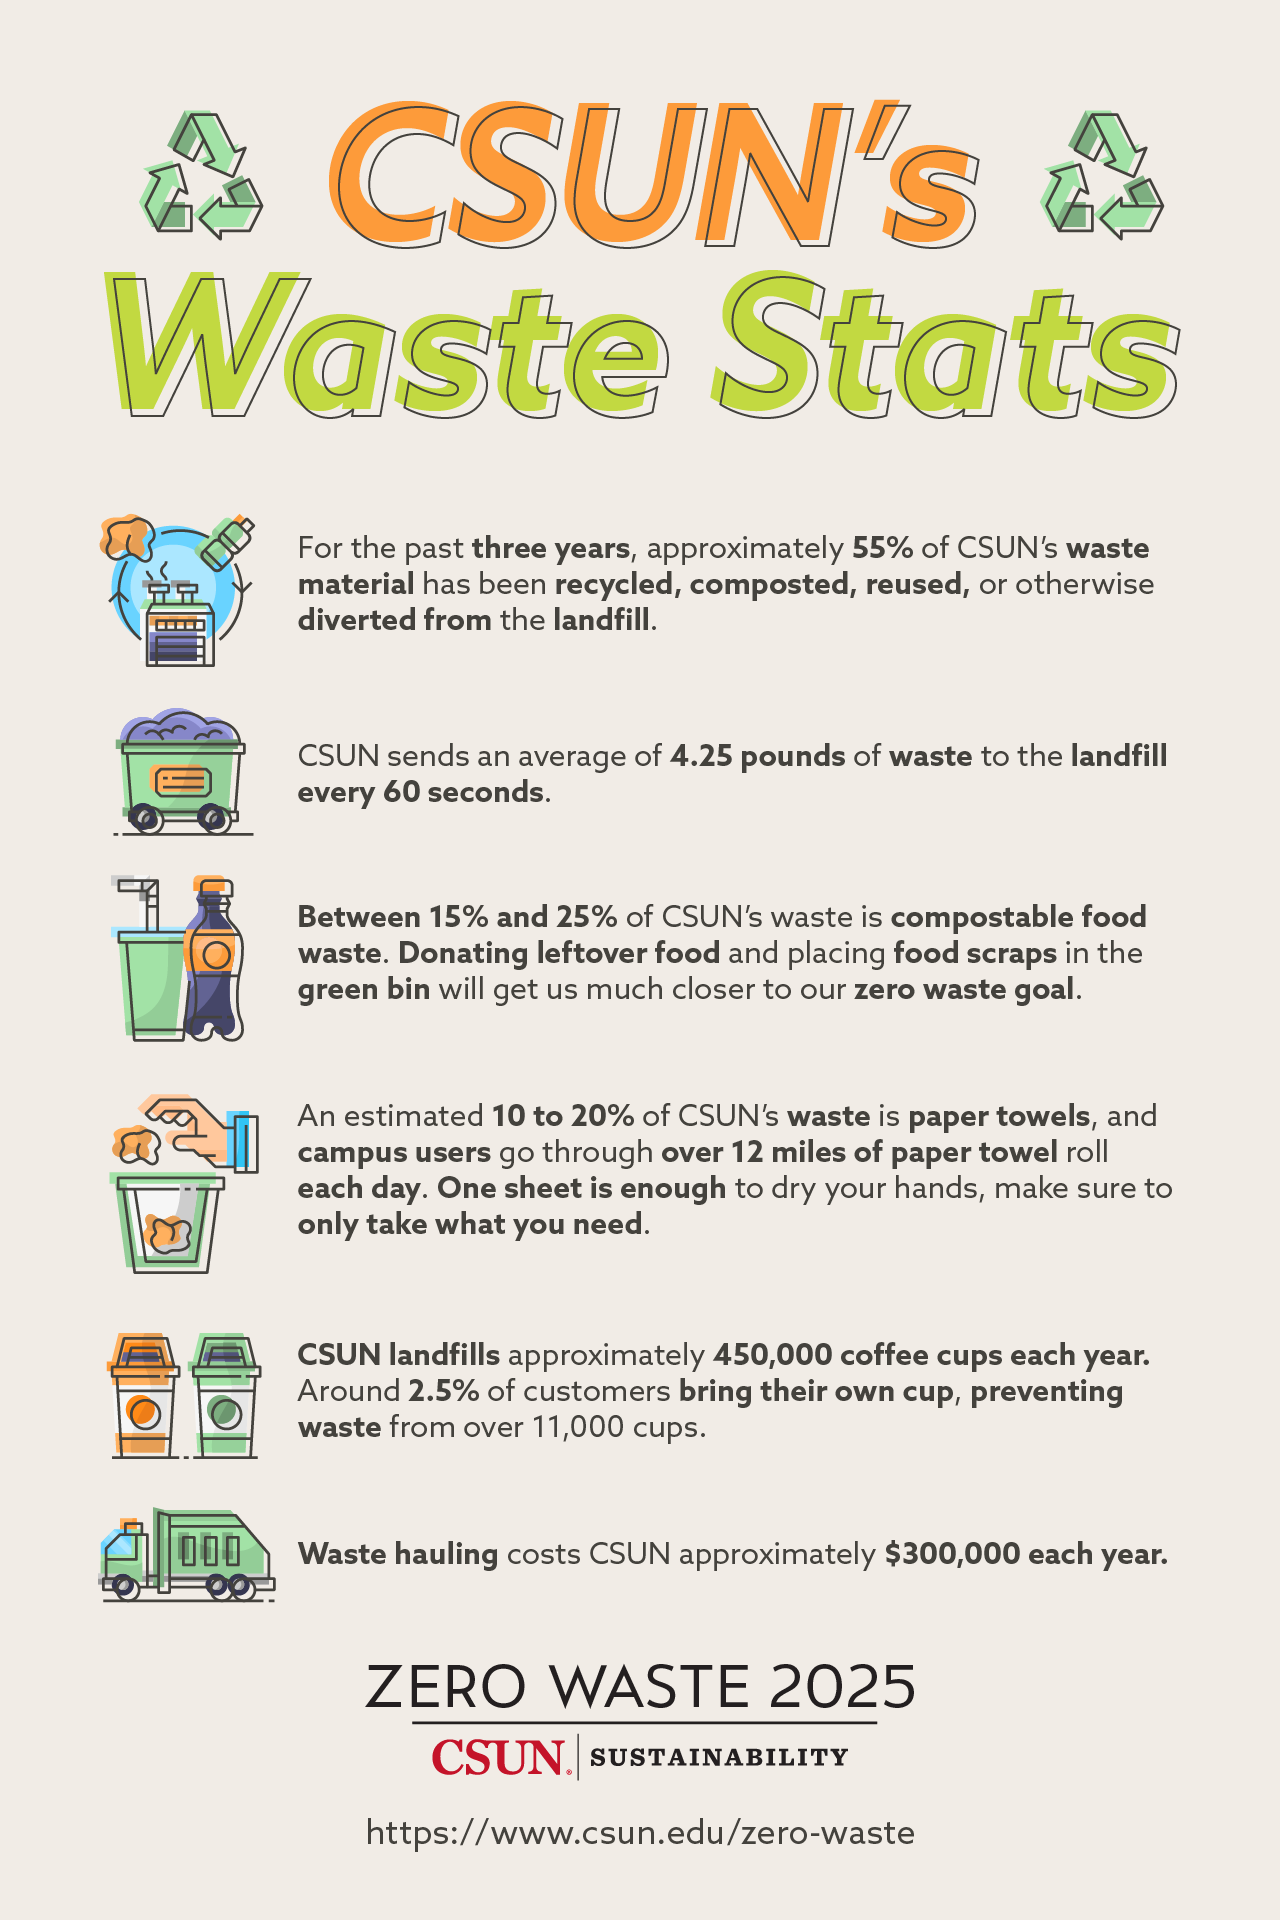 CSUN's Waste Stats: For the past three years, approximately 55% of CSUN's waste material has be recycled, composted, reused, or otherwise diverted from the landfill. CSUN sends an average of 4.25 pounds of waste to the landfill every 60 seconds. Between 15% and 25% of CSUN's waste is paper towels, and campus users go through over 12 miles of paper towel roll each day. One sheet is enough to dry your hands, make sure to only take what you need. CSUN landfills approximately 450,000 coffee cups each year. Around 2.5% of customers bring their own cup, preventing waste from over 11,000 cups. Waste hauling costs CSUN approximately $300,000 each year.